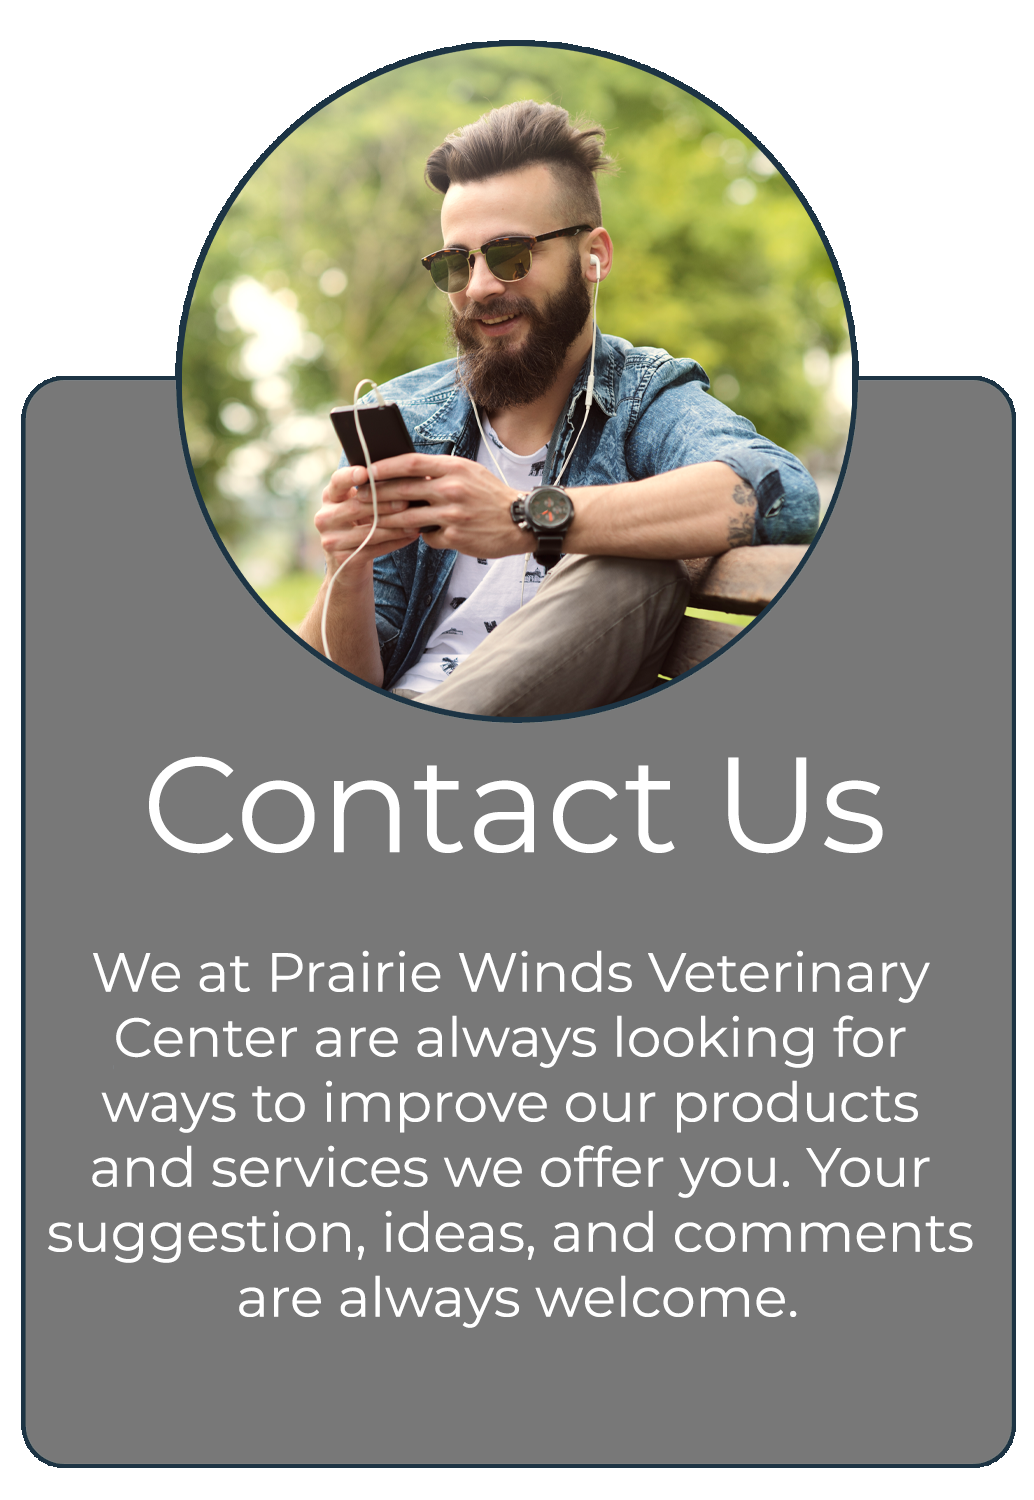 Contact us - Click to contact and find directions